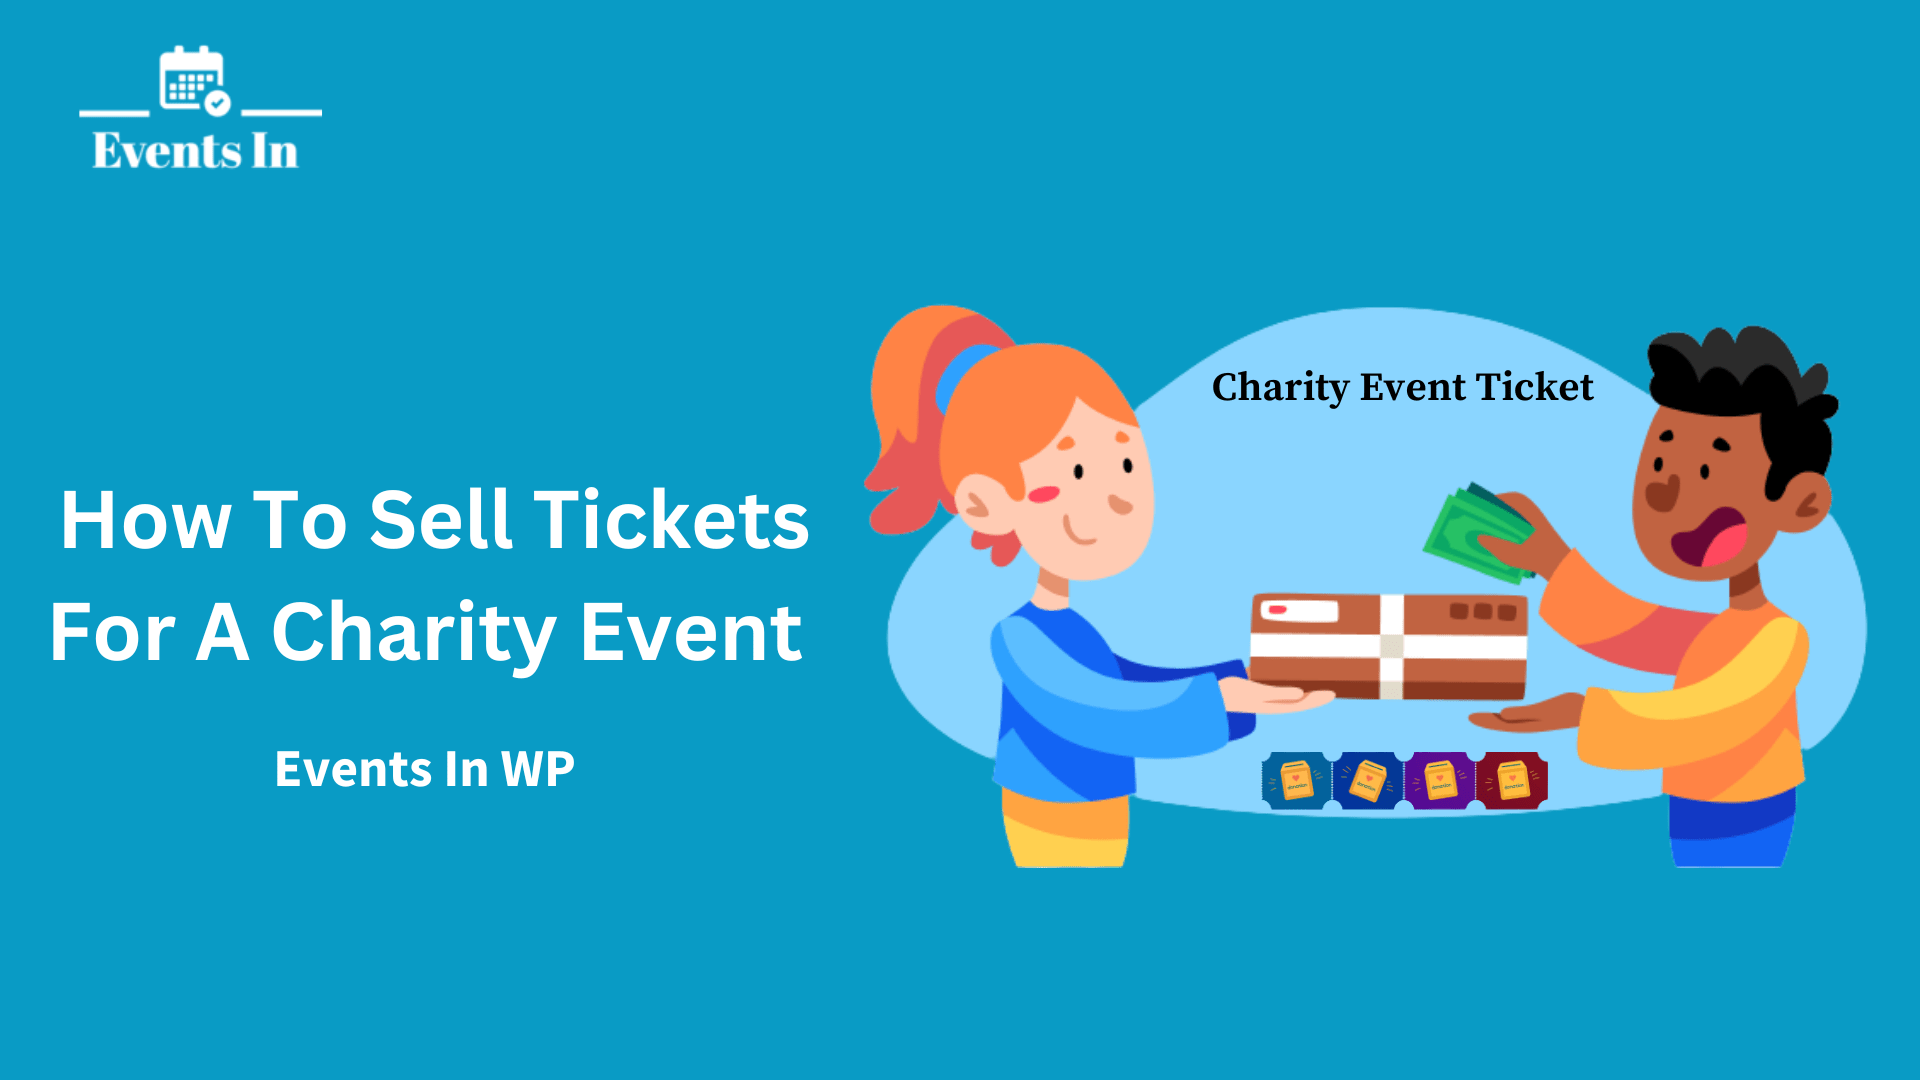 How To Sell Tickets For A Charity Event